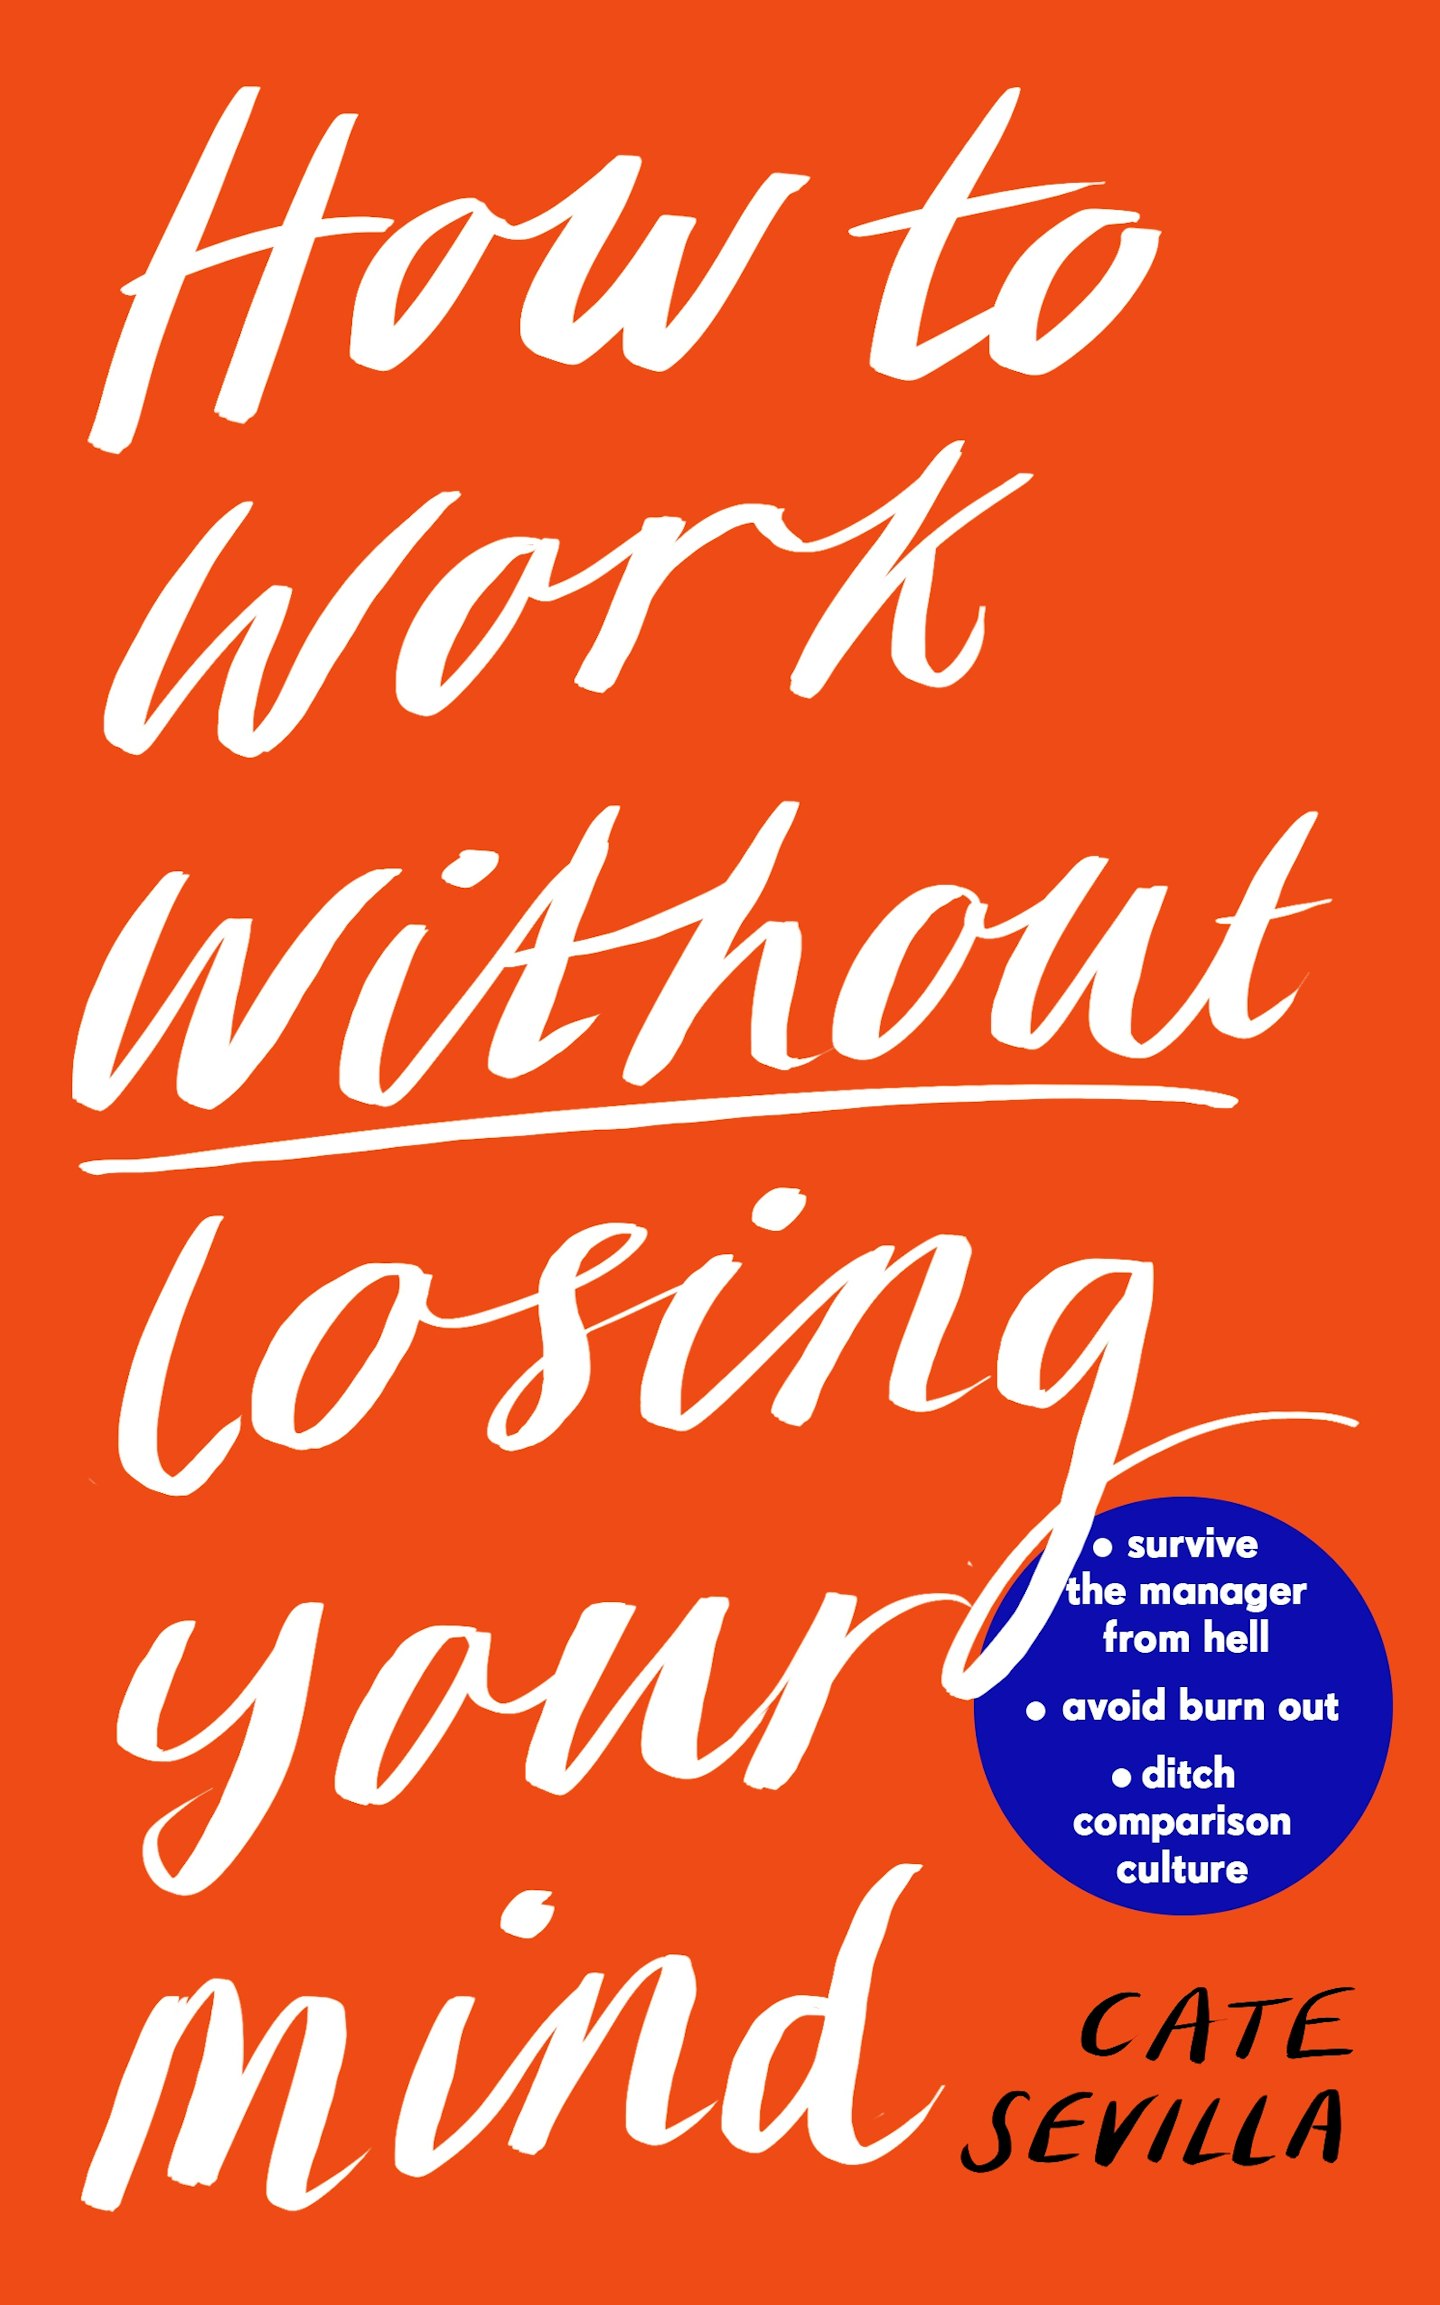 Cate Sevilla - How to Work Without Losing Your Mind: A Realistic Guide to the Hell of Modern Work, by Cate Sevilla